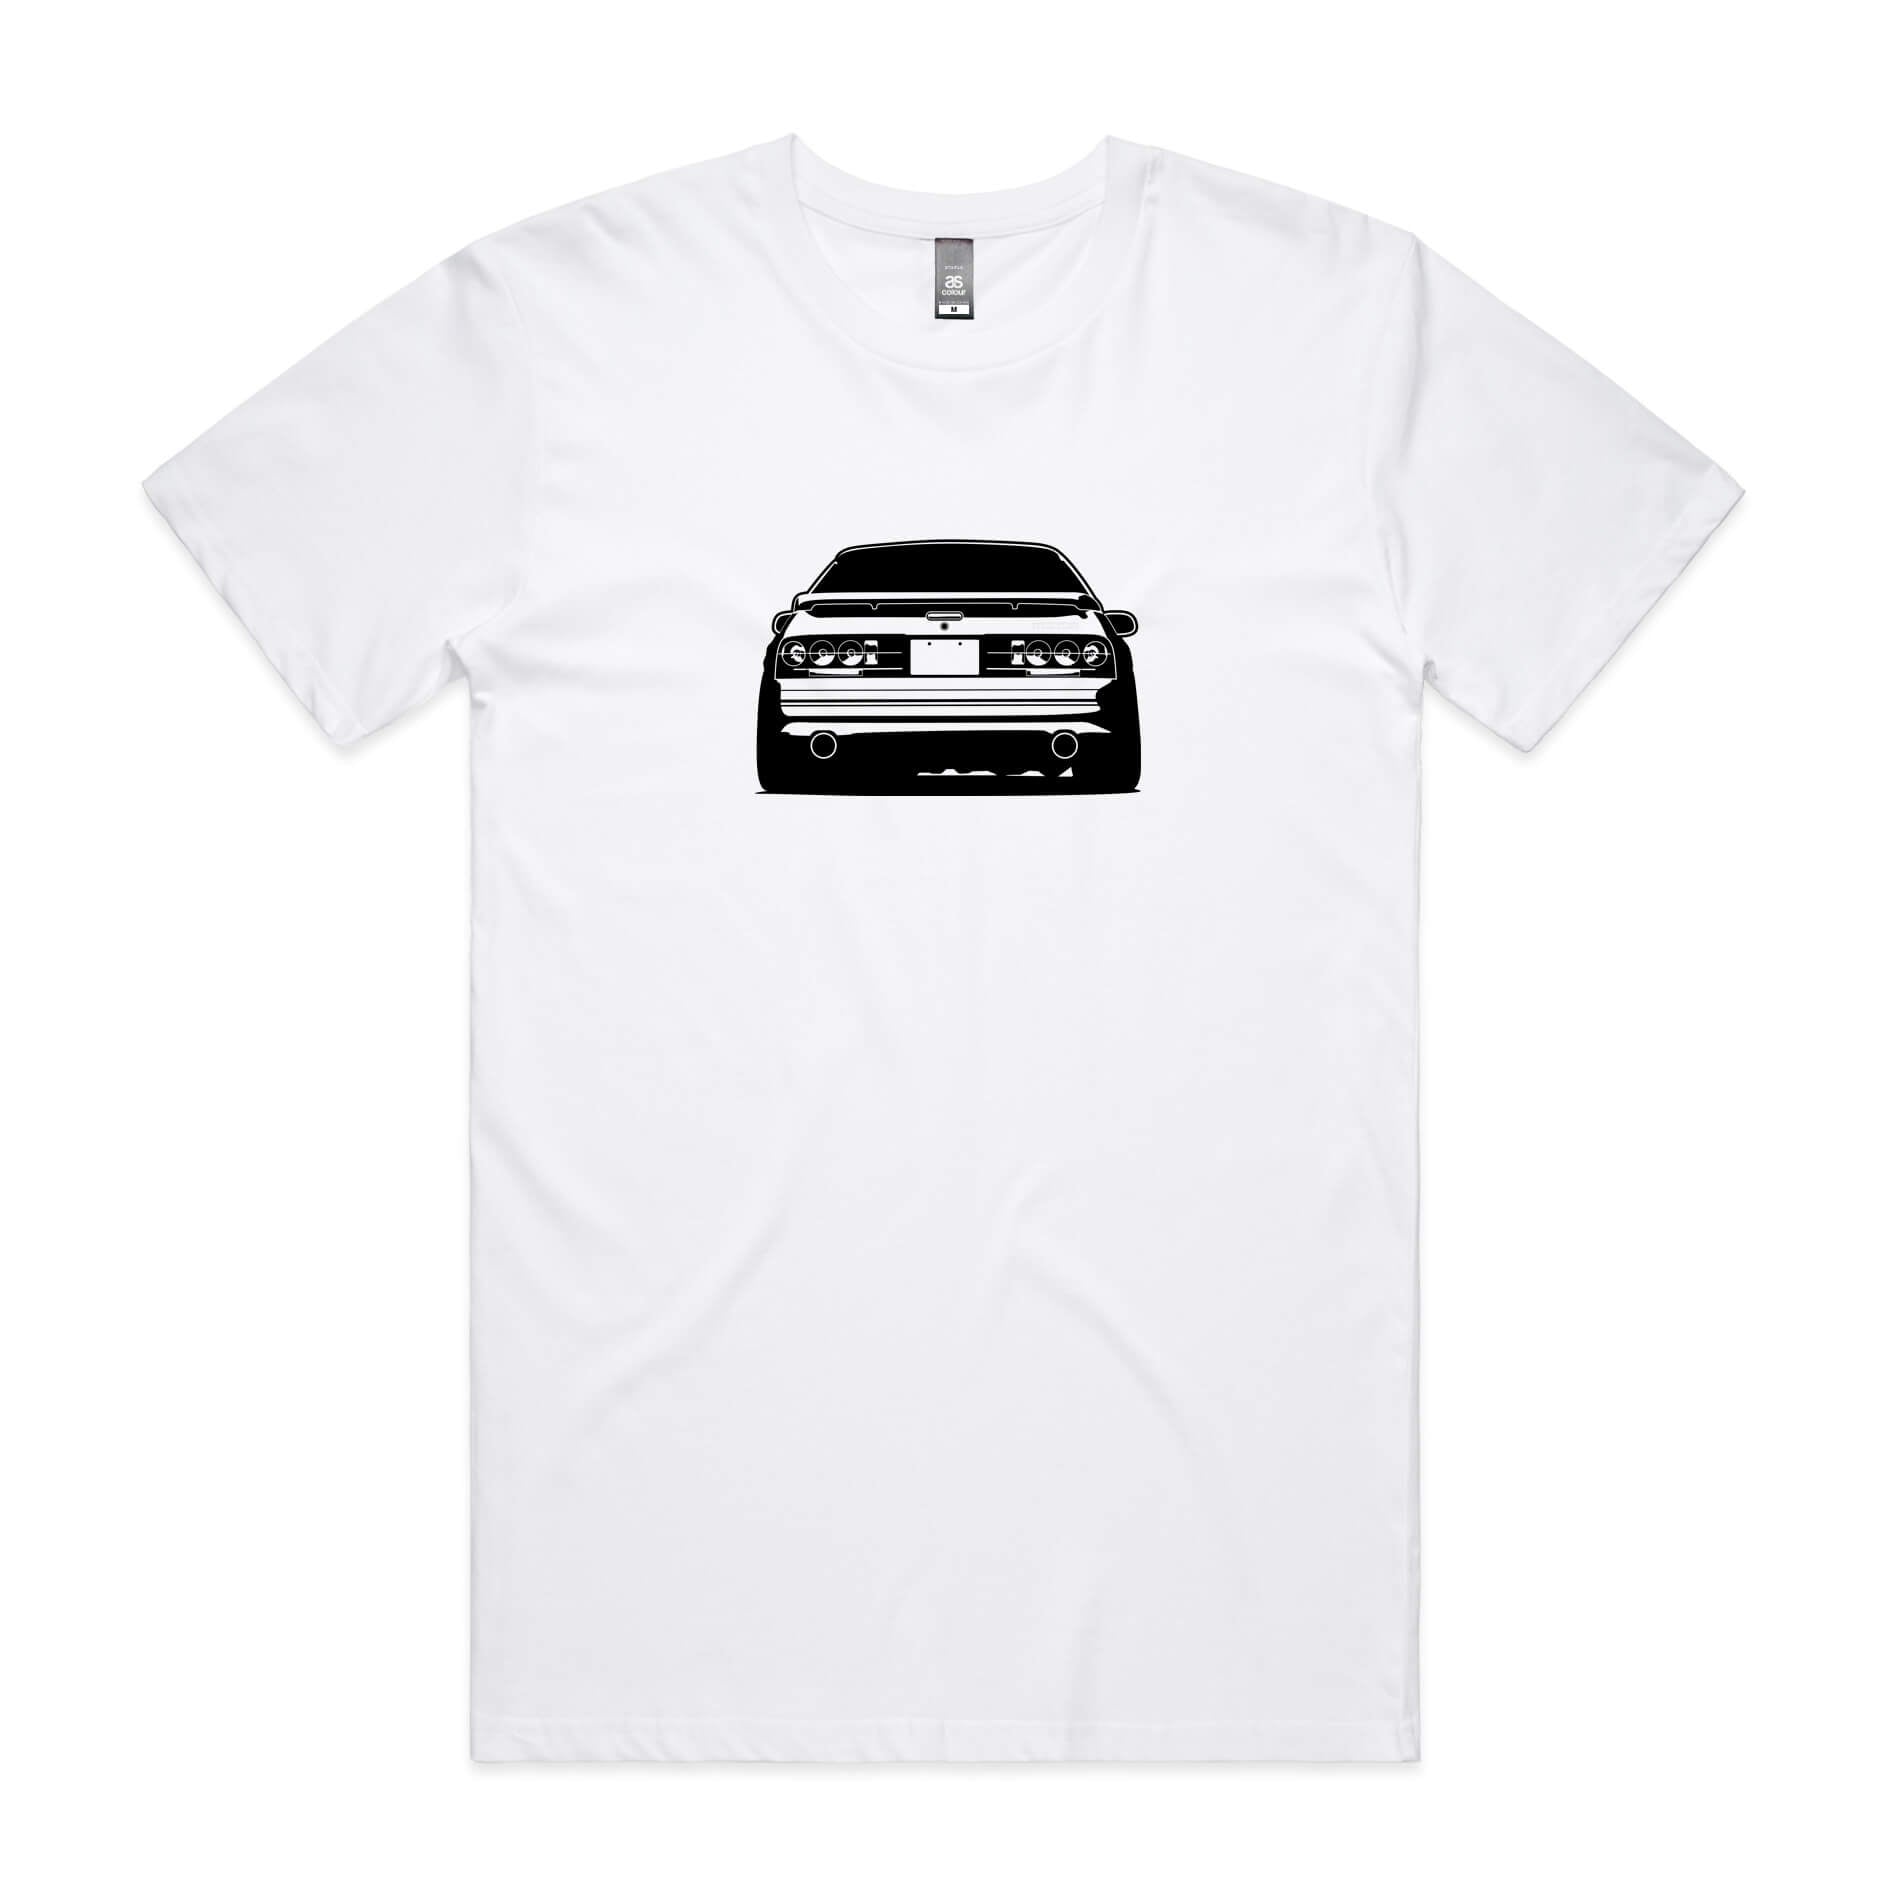 Mazda RX7 FC t-shirt in white with a black car graphic